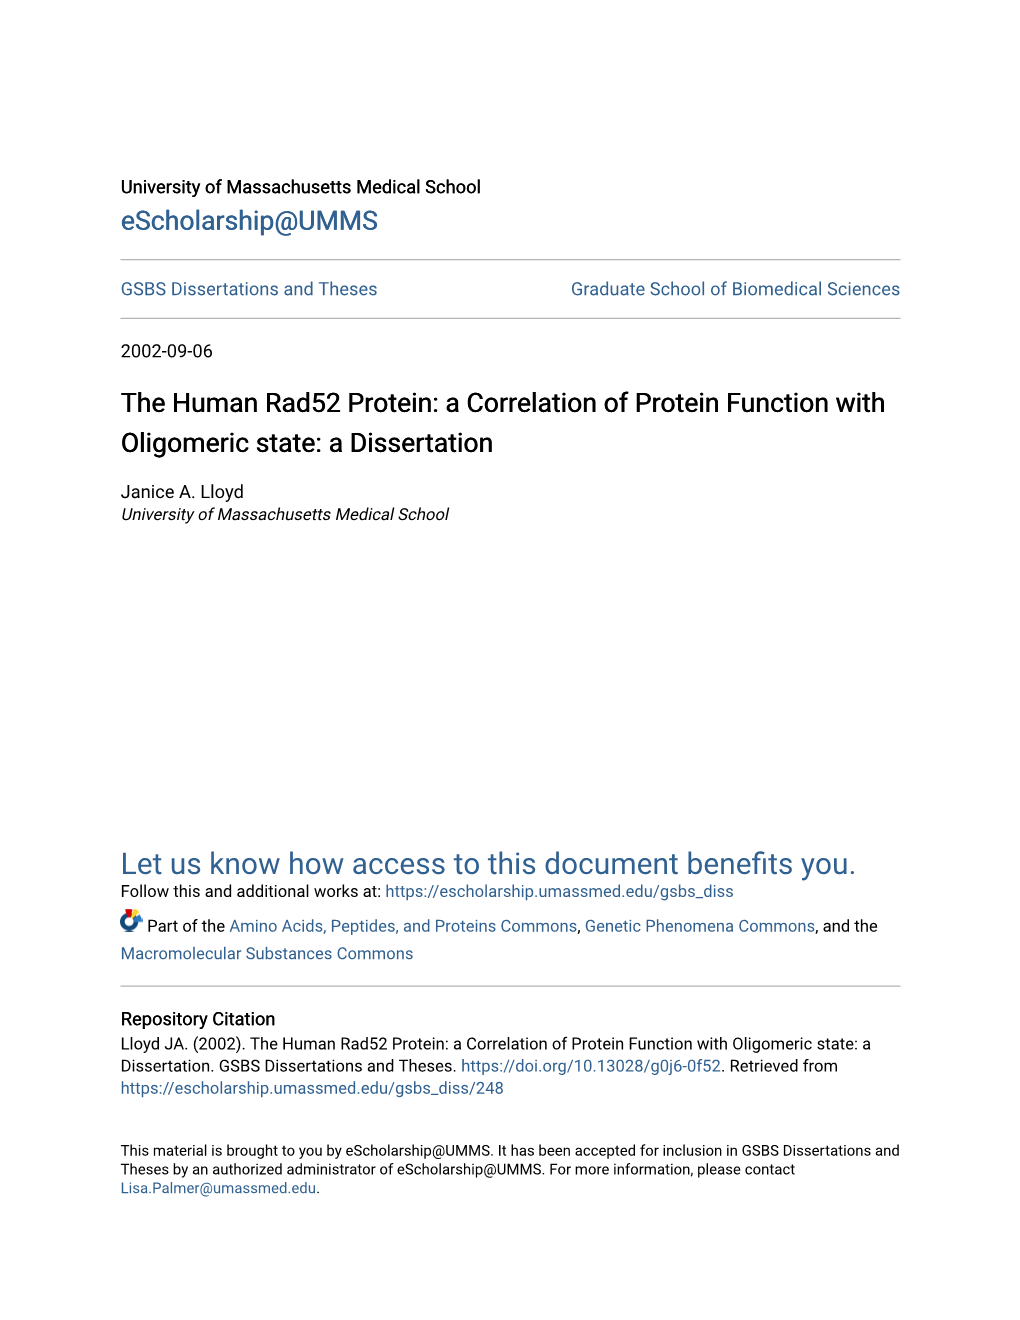 The Human Rad52 Protein: a Correlation of Protein Function with Oligomeric State: a Dissertation